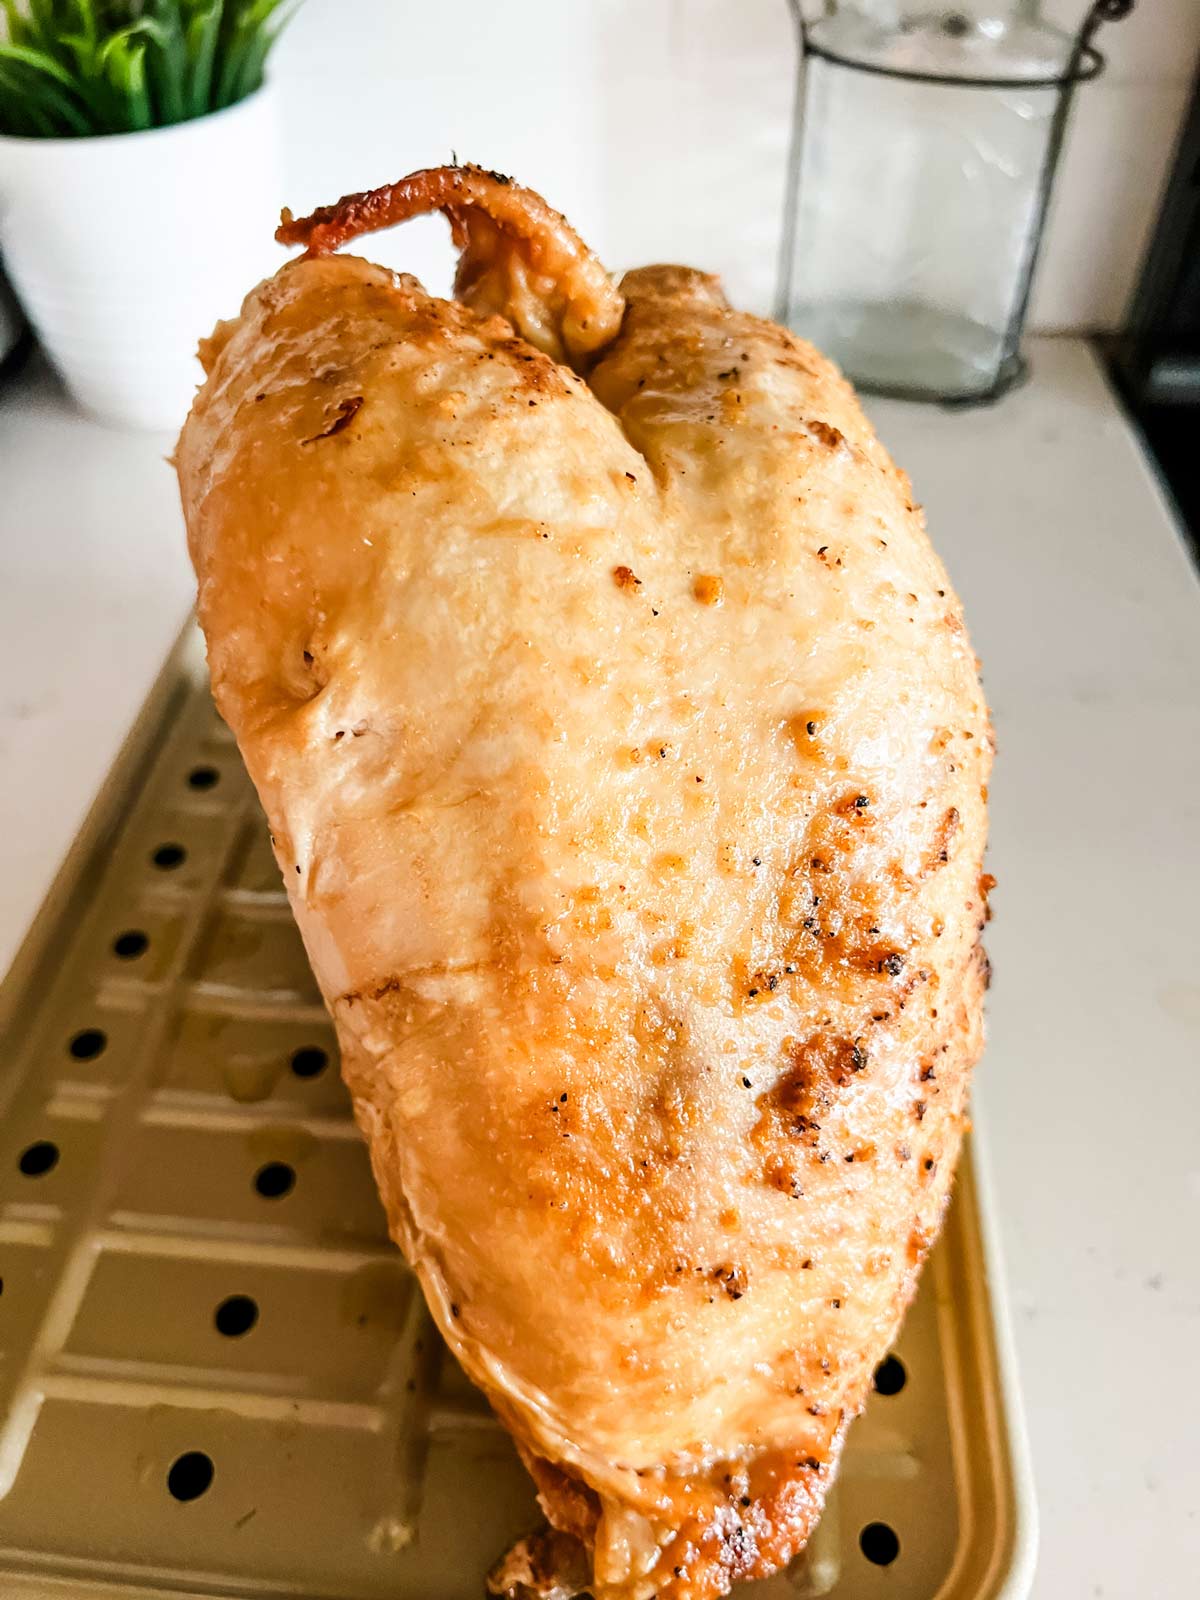 A slow cooked turkey breast ready for the broiler.